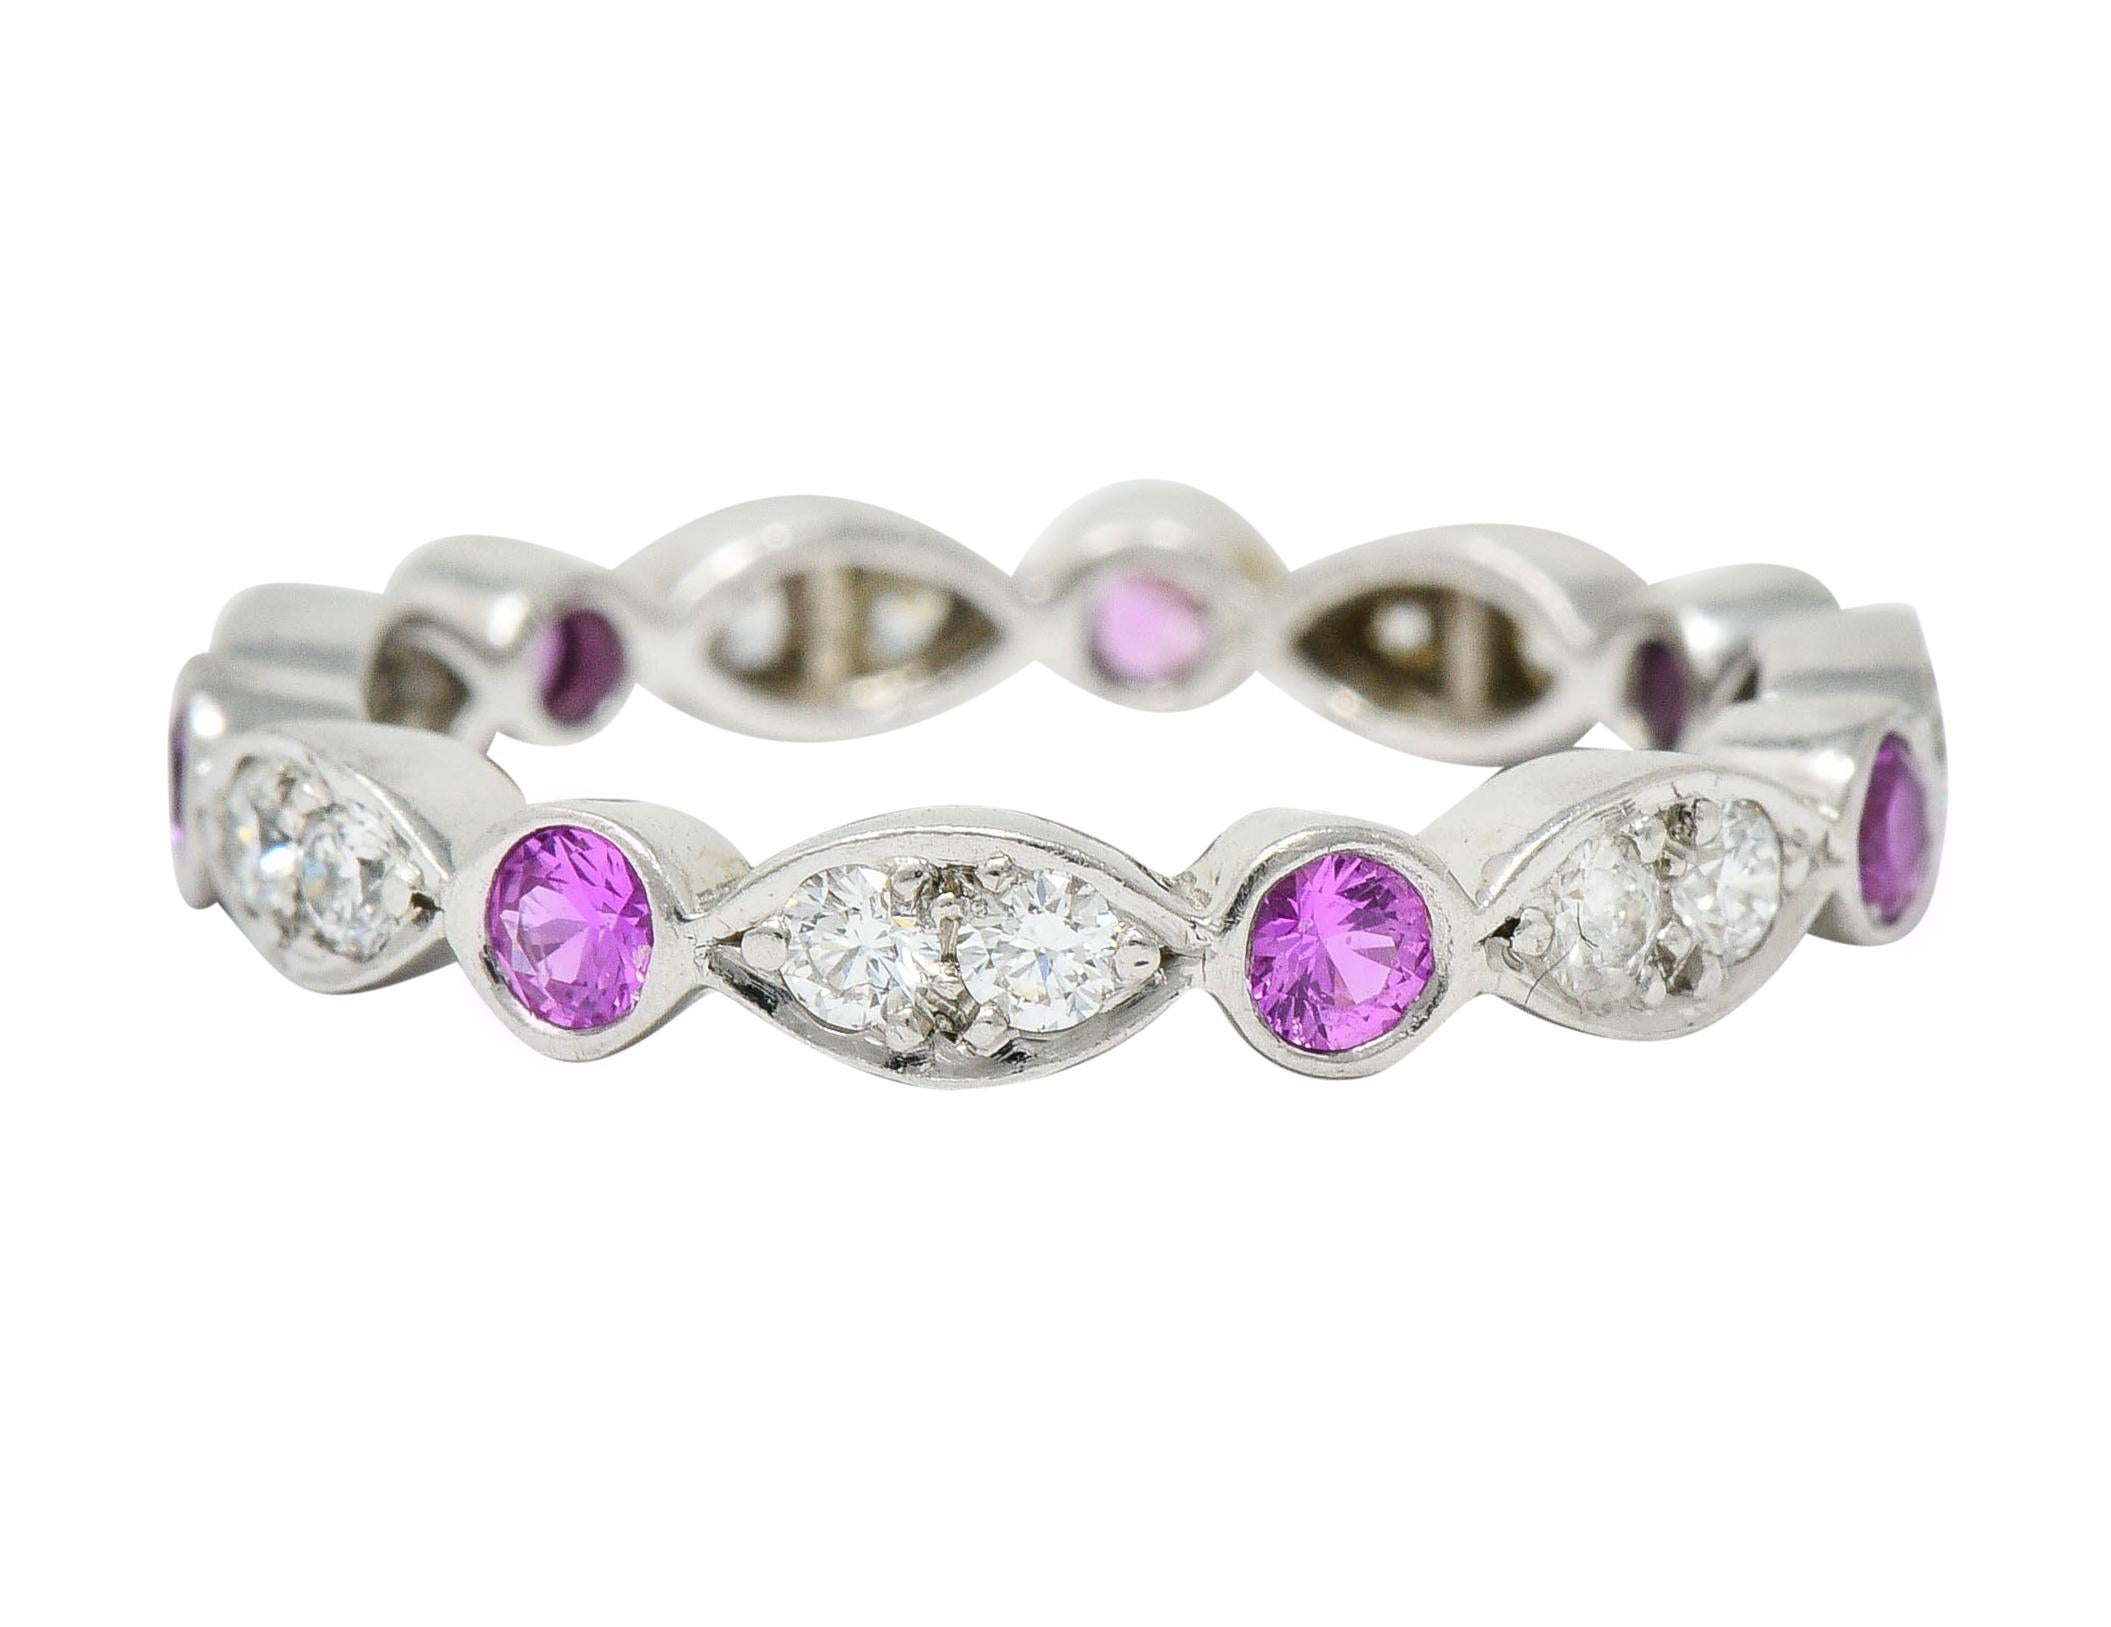 Eternity band ring is designed by diamond set navette forms

Alternating with round bezels of pink sapphire

Total diamond weight is approximately 0.35 carat with F/G color and VS clarity

Sapphires are well-matched and weigh in total approximately